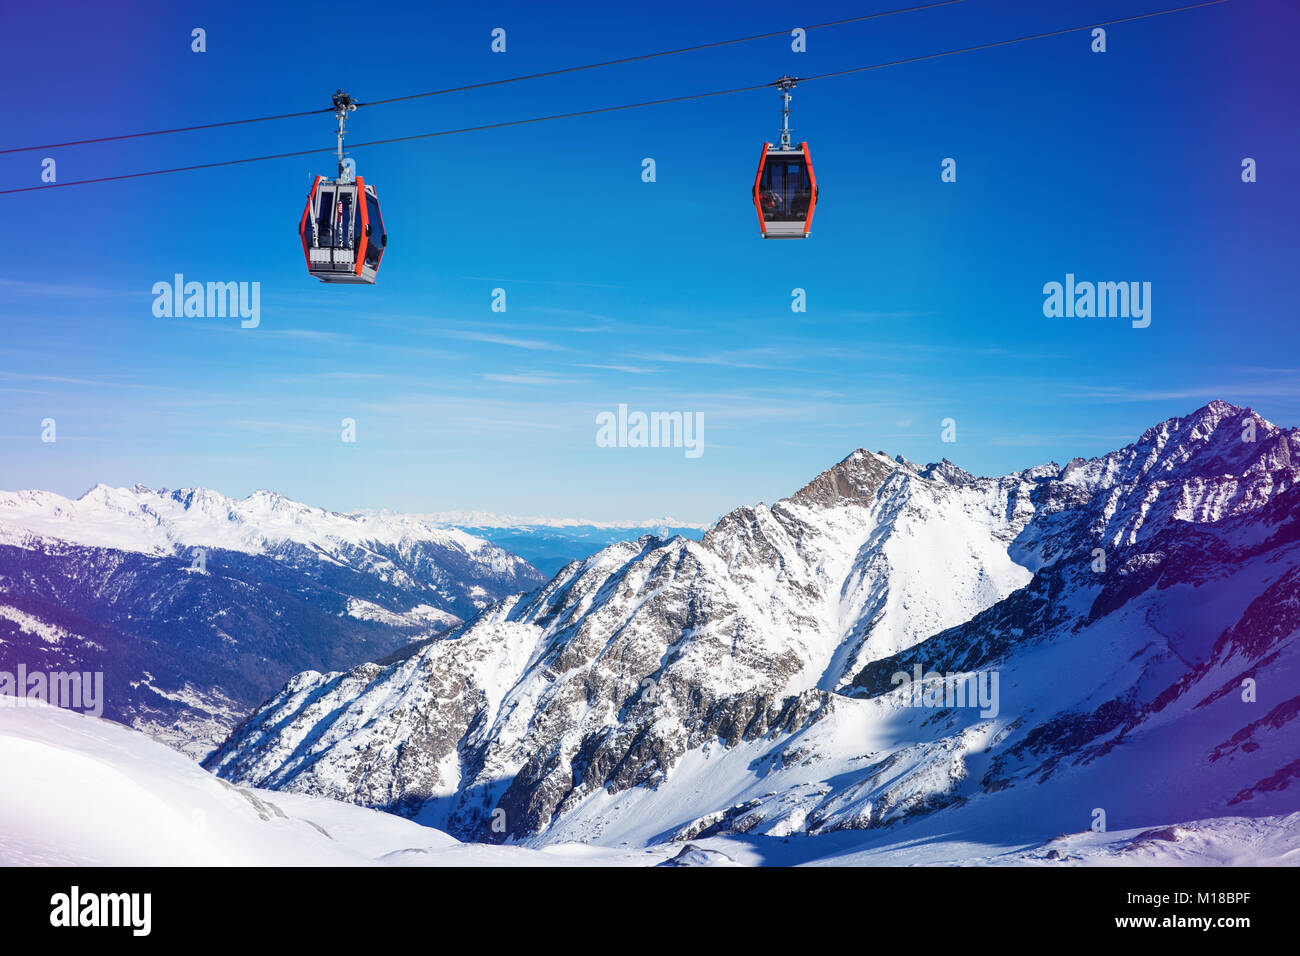 ski resort cable cars over beautiful mountain landscape at Italy Alps Stock Photo